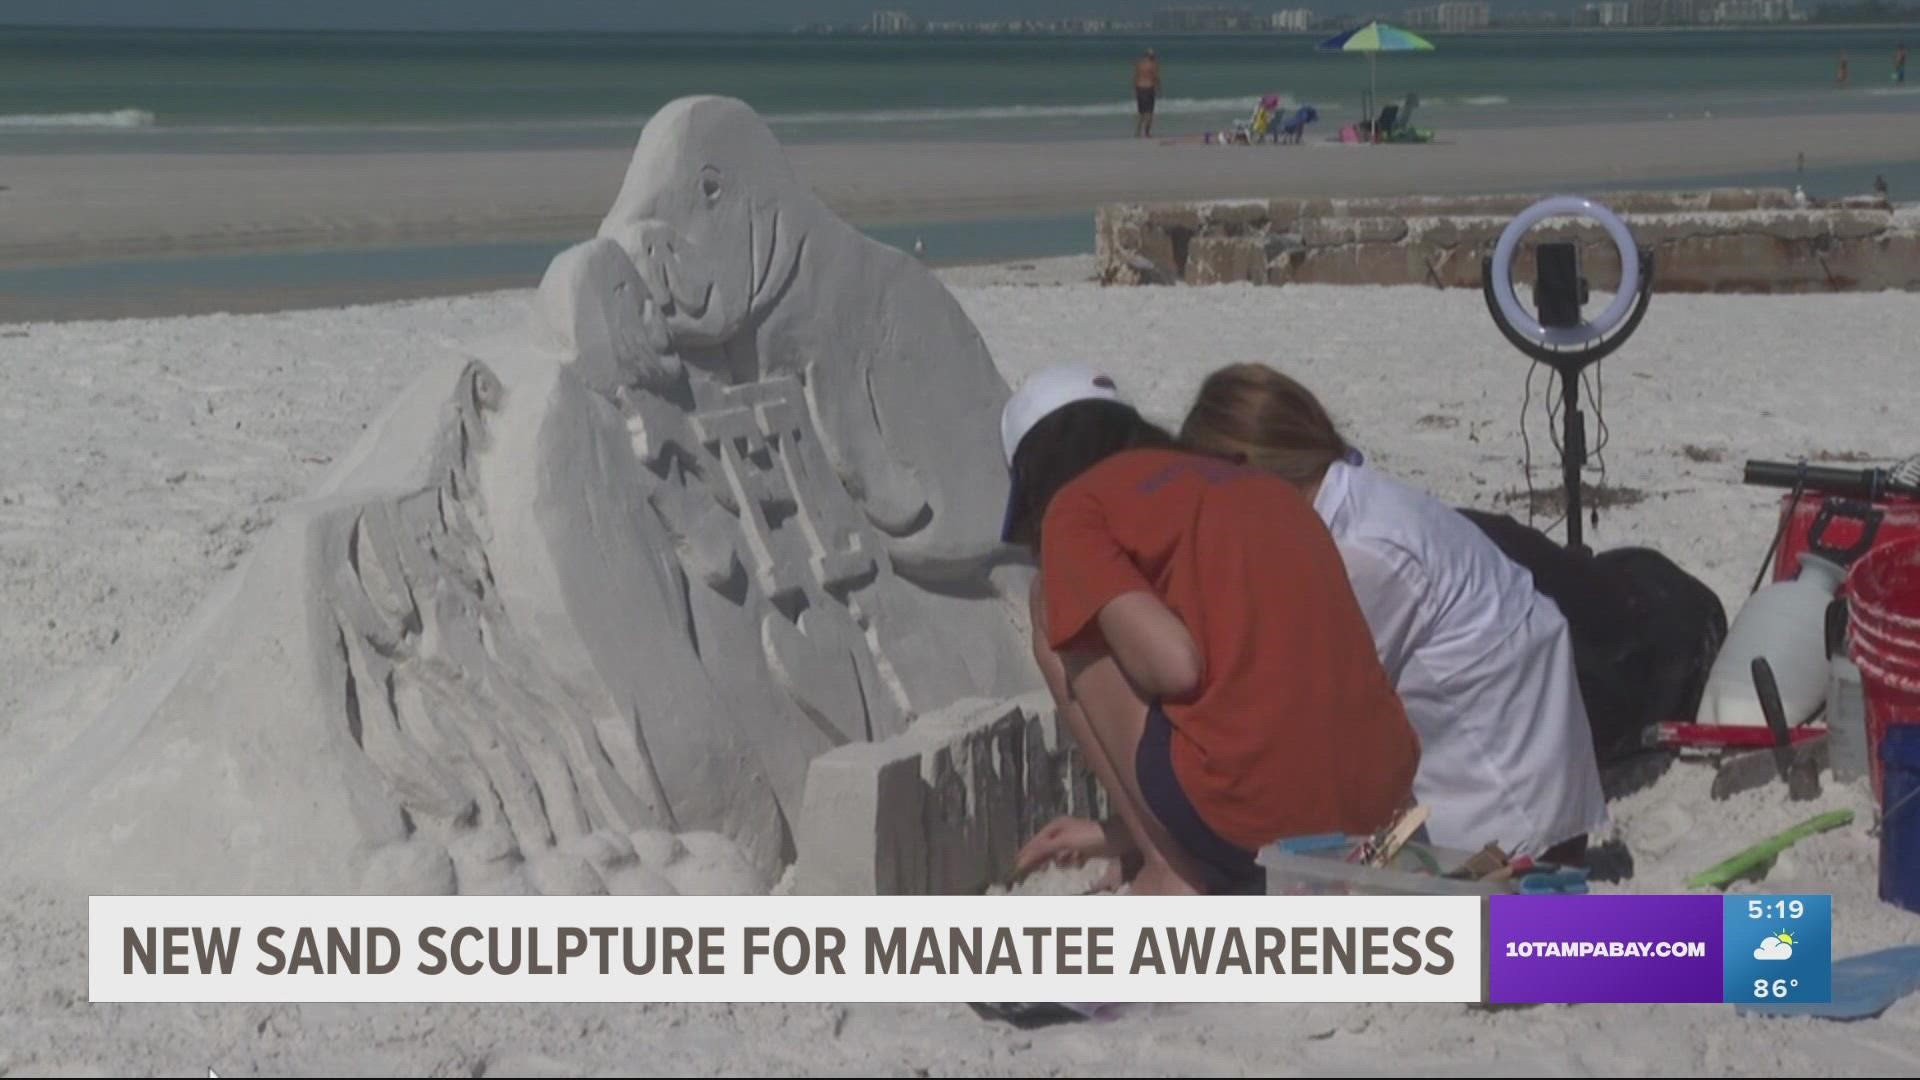 The recent threat to sea grass along the Florida coast was the inspiration behind the sand sculpture.